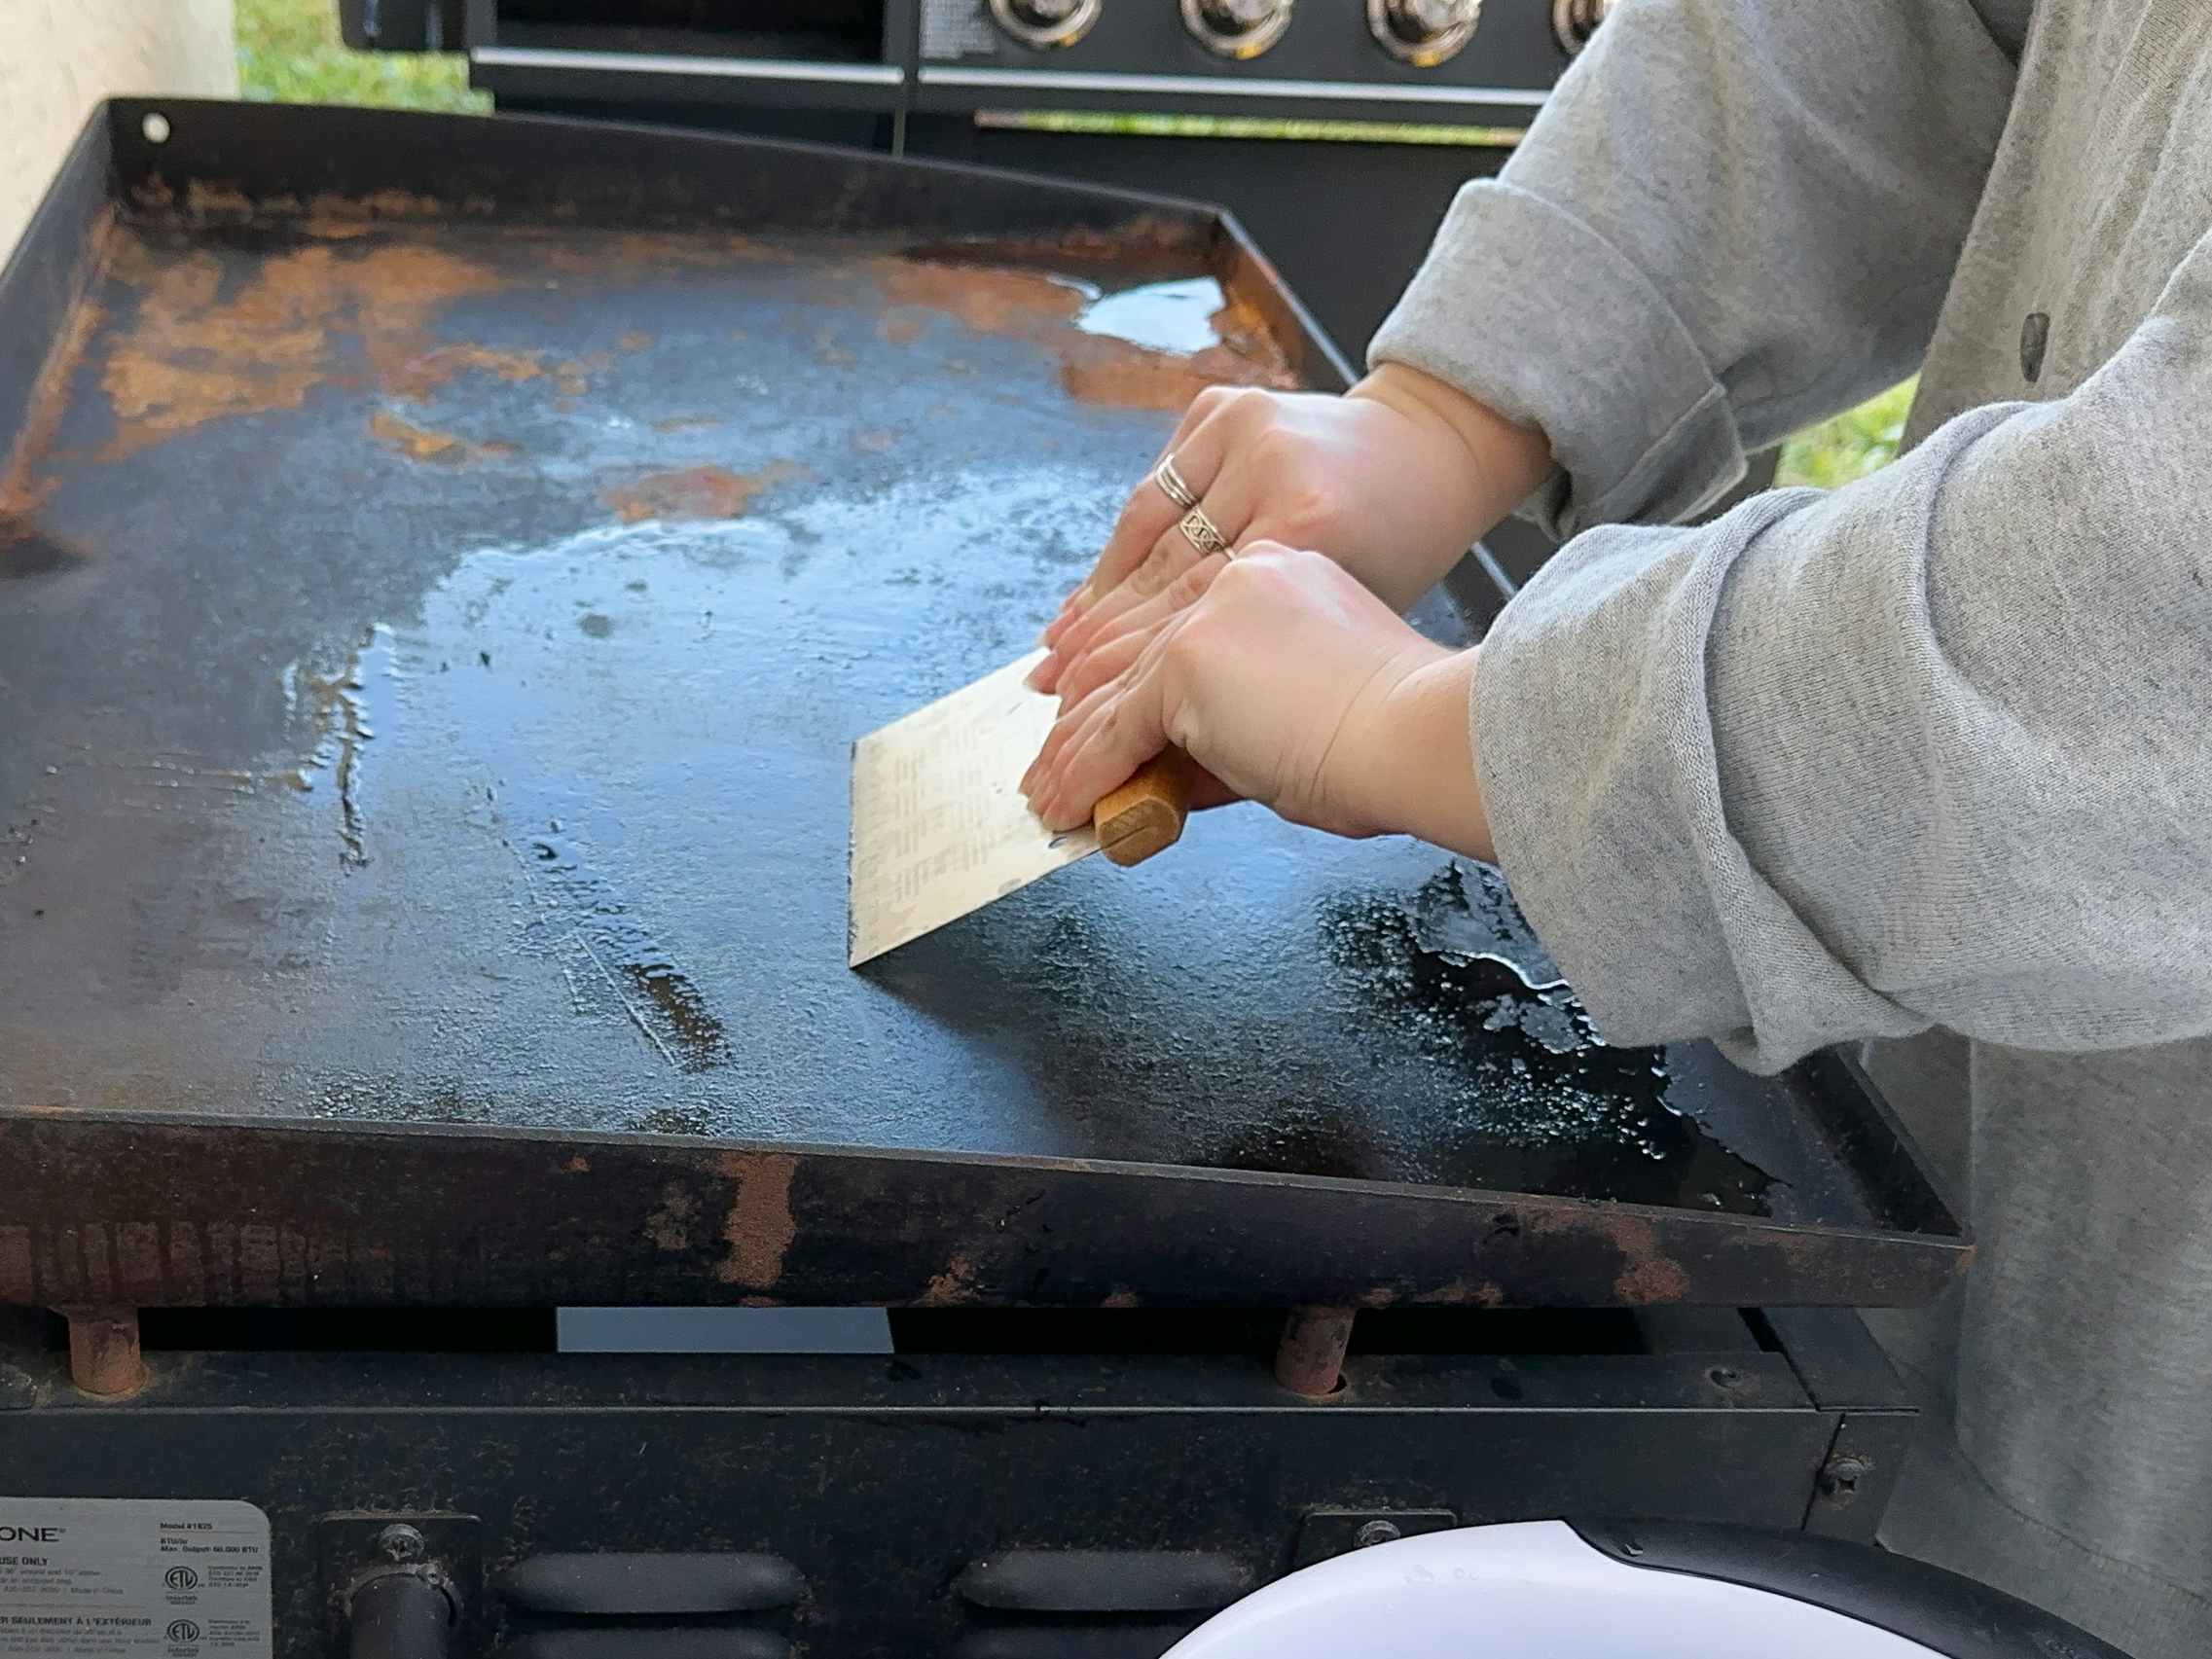 Someone scraping food debris off of a Blackstone griddle